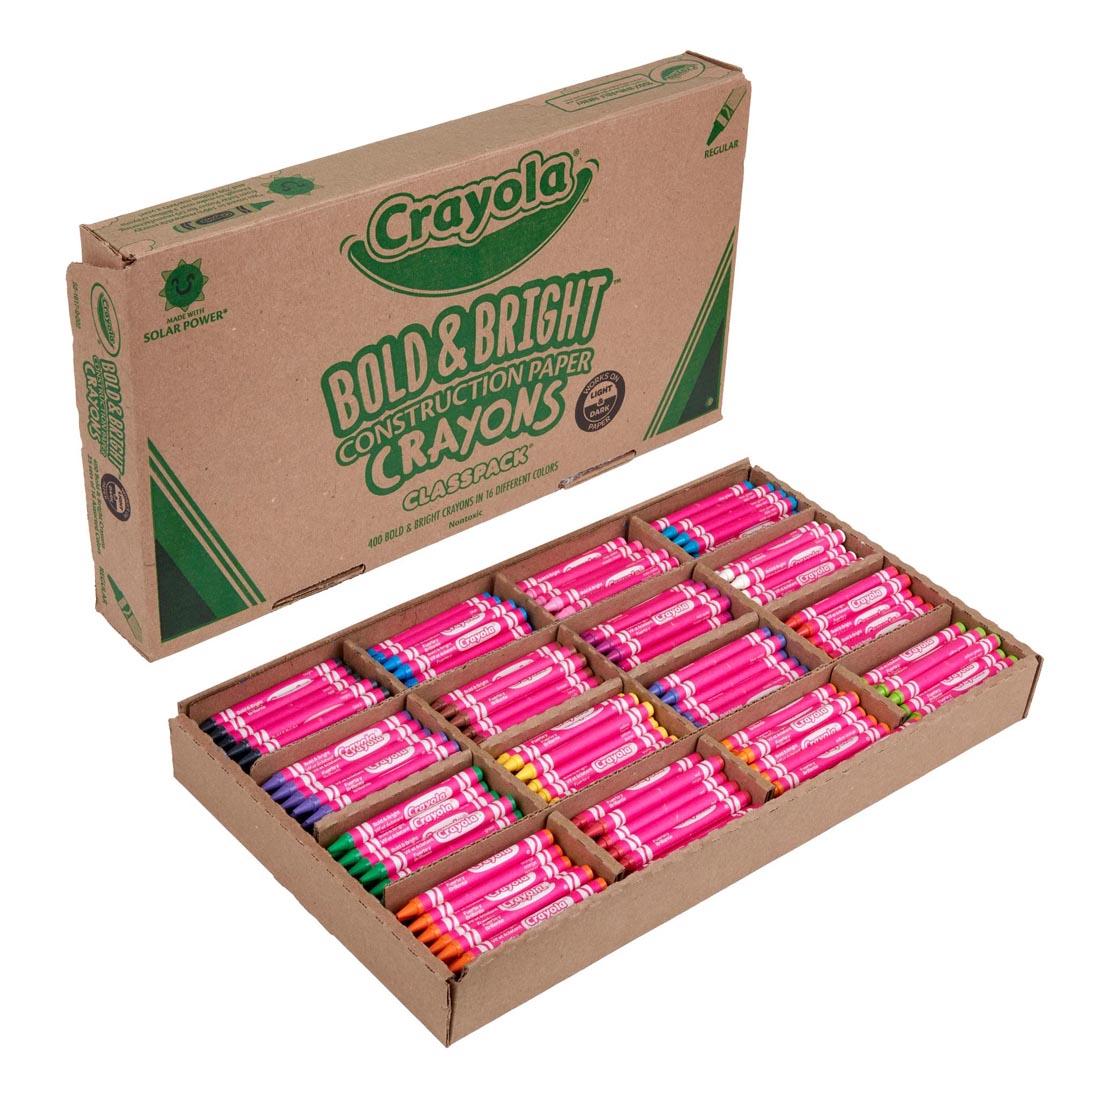 Crayola Bold & Bright Construction Paper Crayons Classpack box, next to a box with the lid off, showing crayons in separated compartments